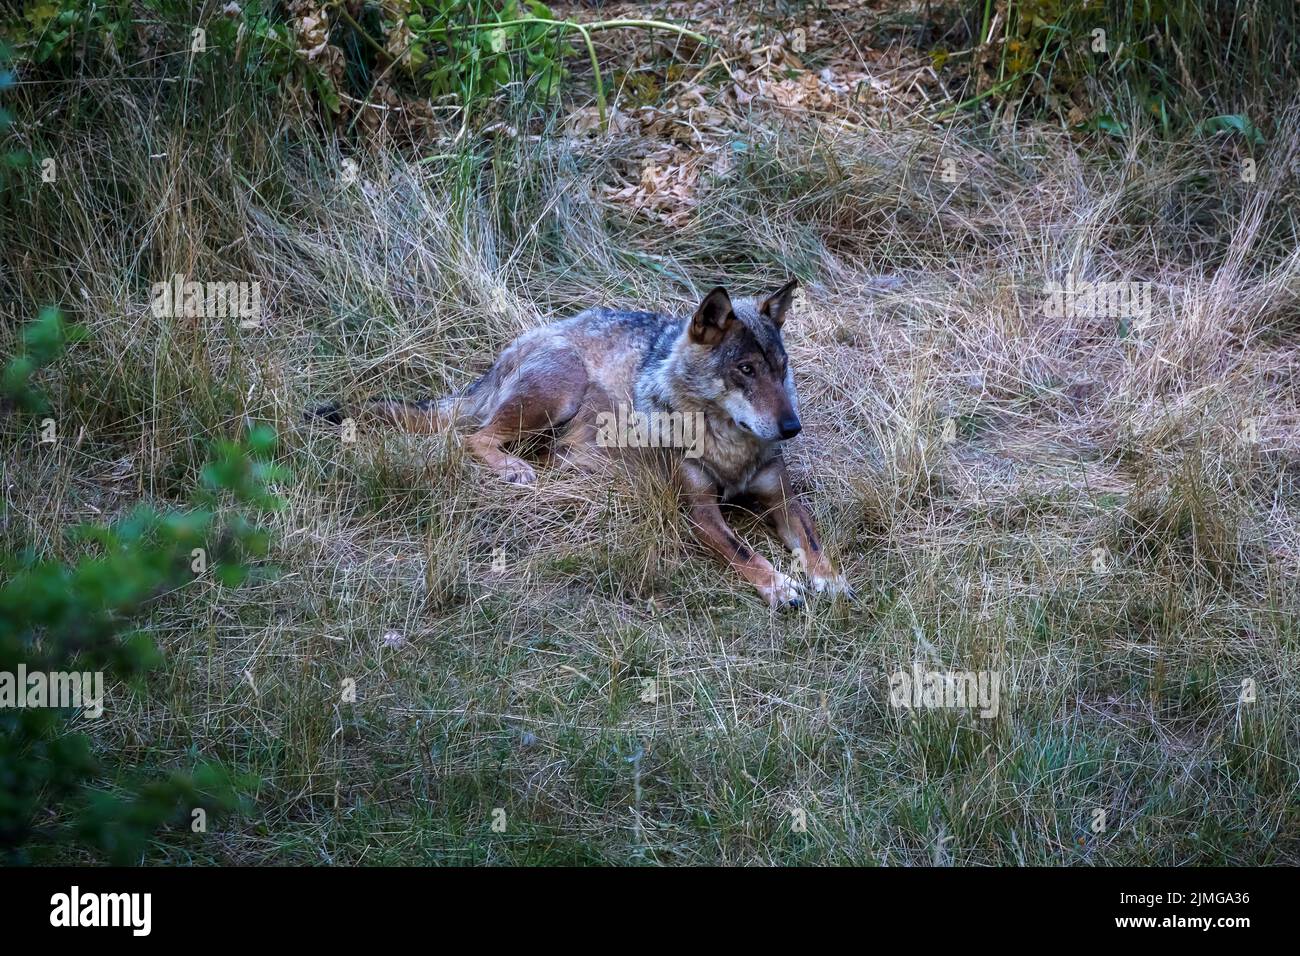 Italian wolf, Canis Lupus Italicus, unique subspecies of the indigenous gray wolf. Adult specimen taken in the forest. Stock Photo